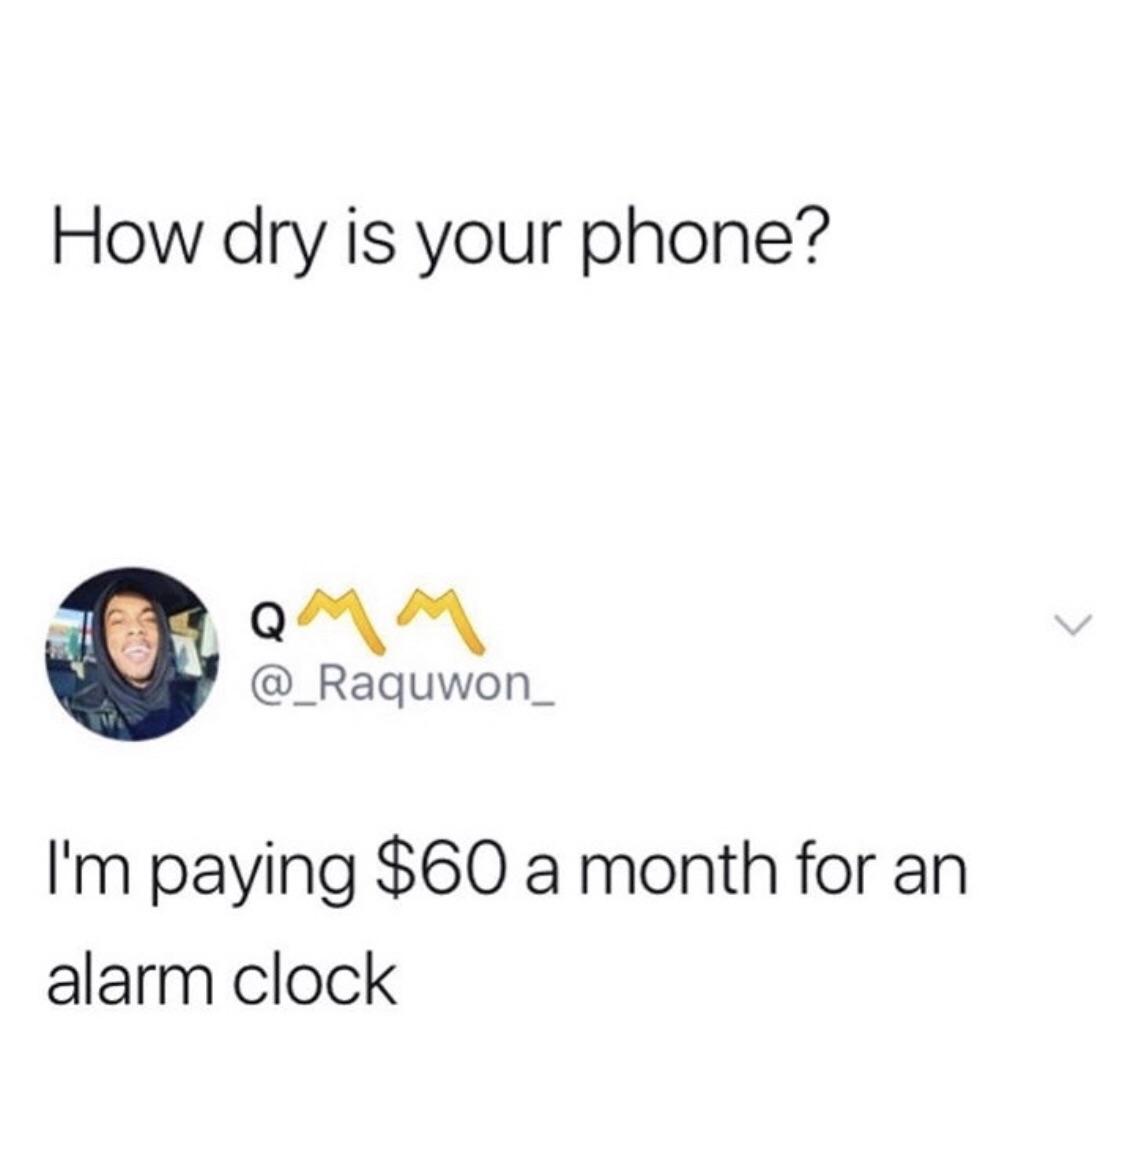 angle - How dry is your phone? I'm paying $60 a month for an alarm clock